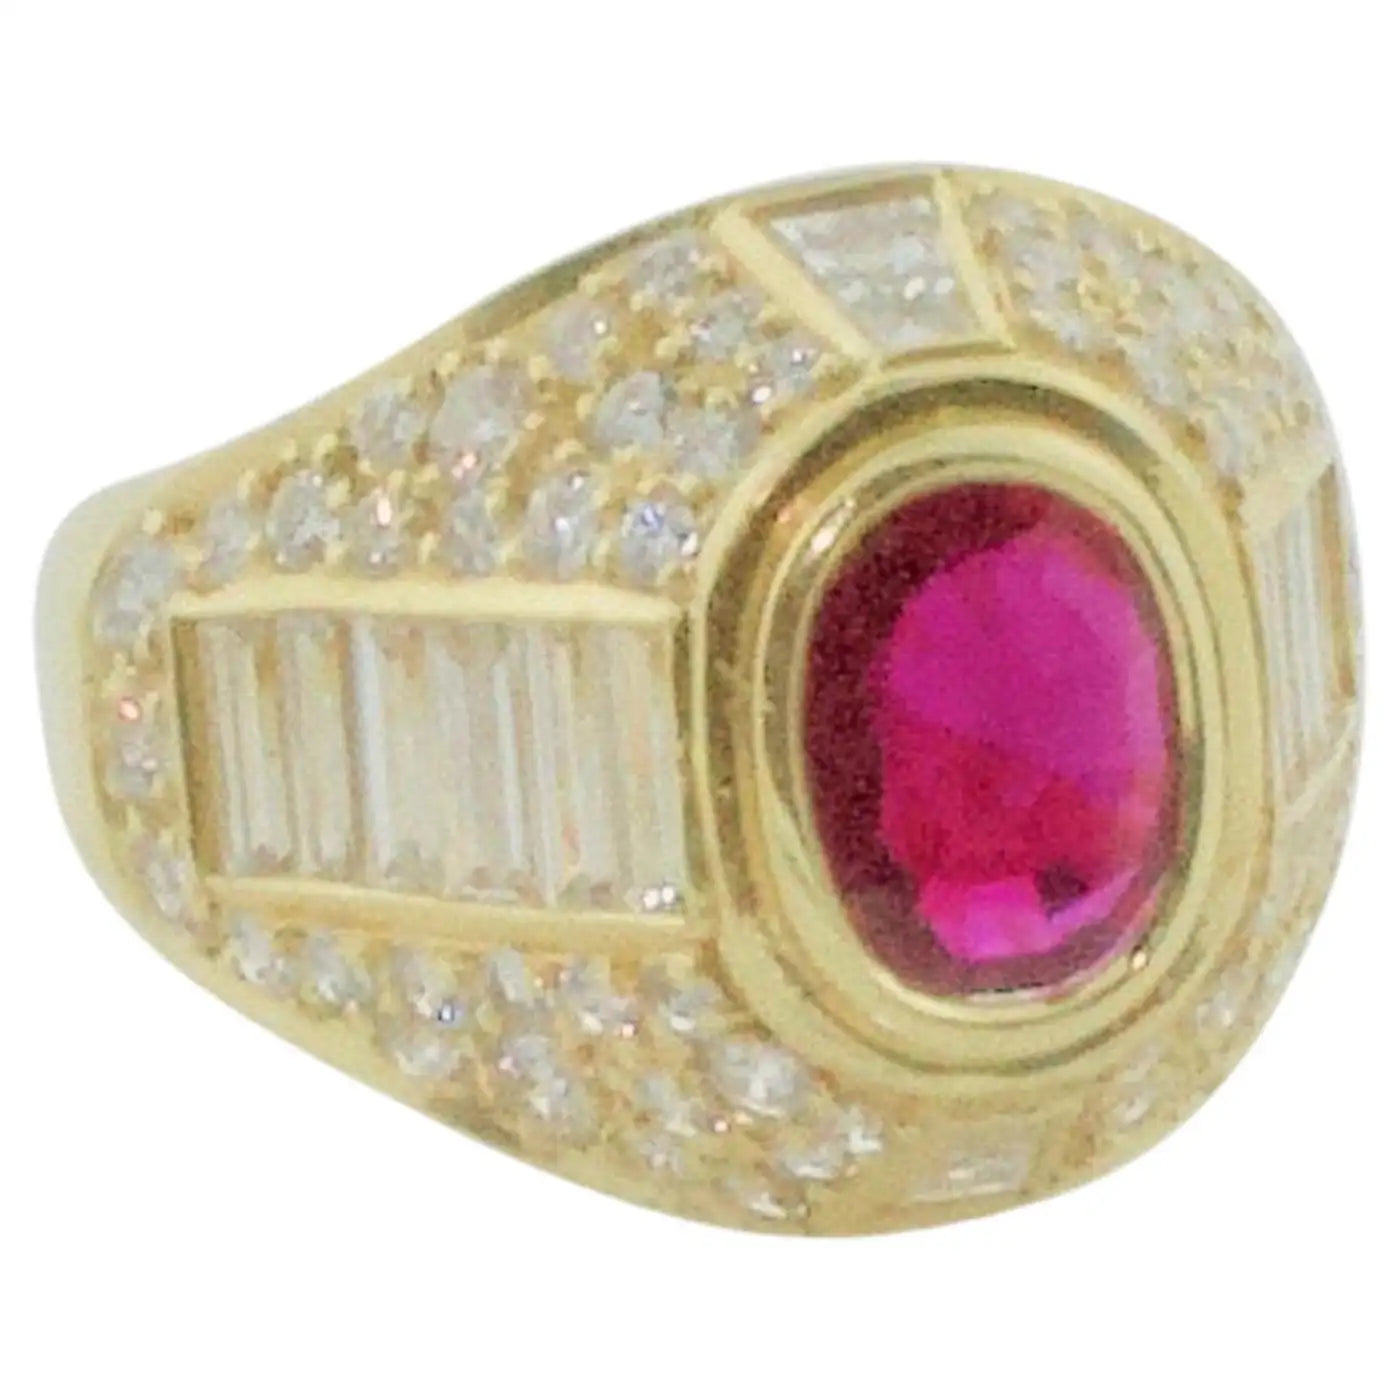 Burma Ruby and Diamond Cigar Band Style Ring in 18k Yellow Gold